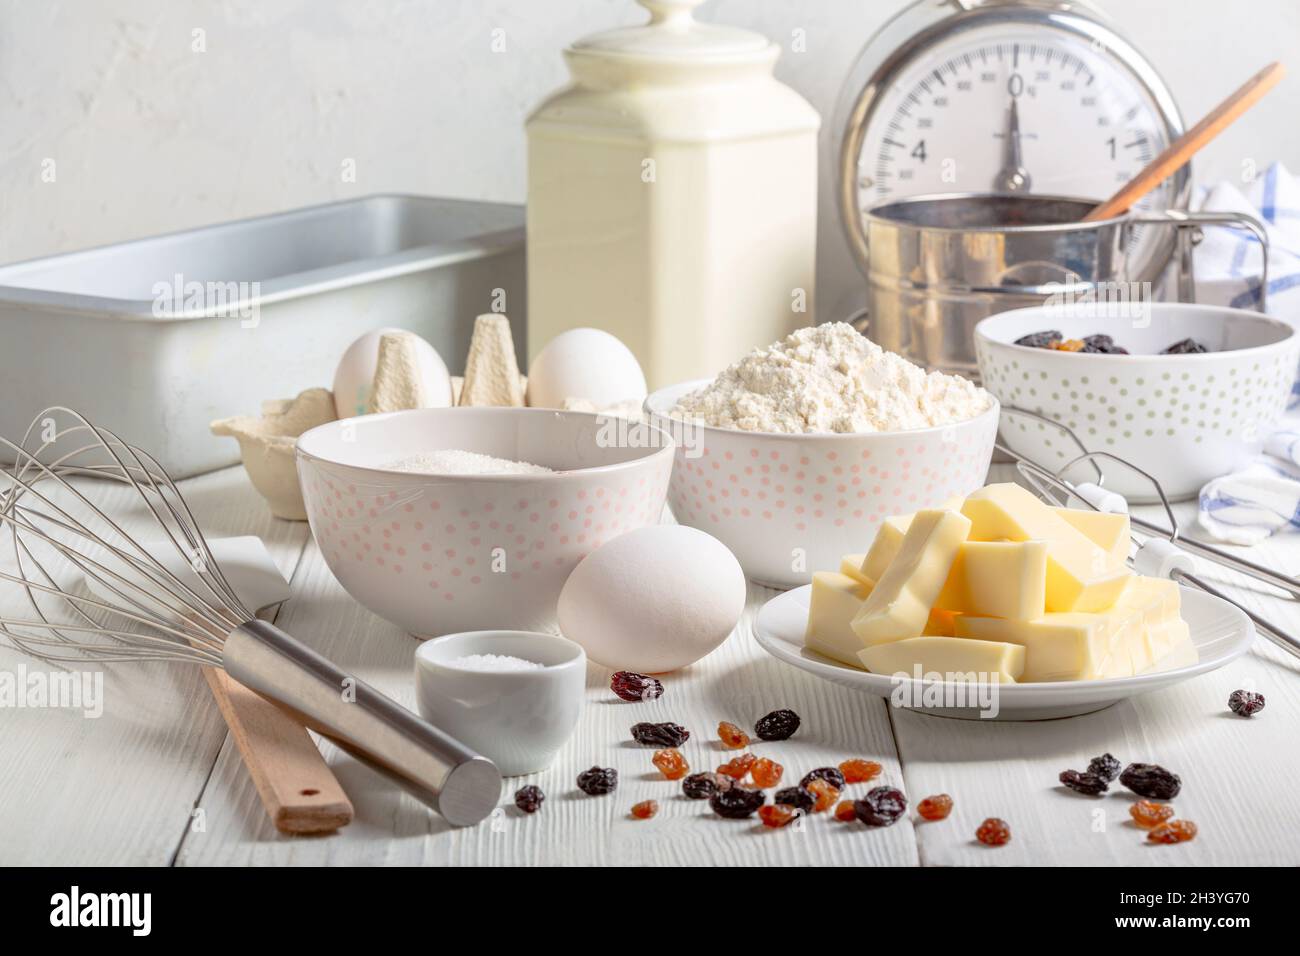 Ingredients and baking tools. Stock Photo